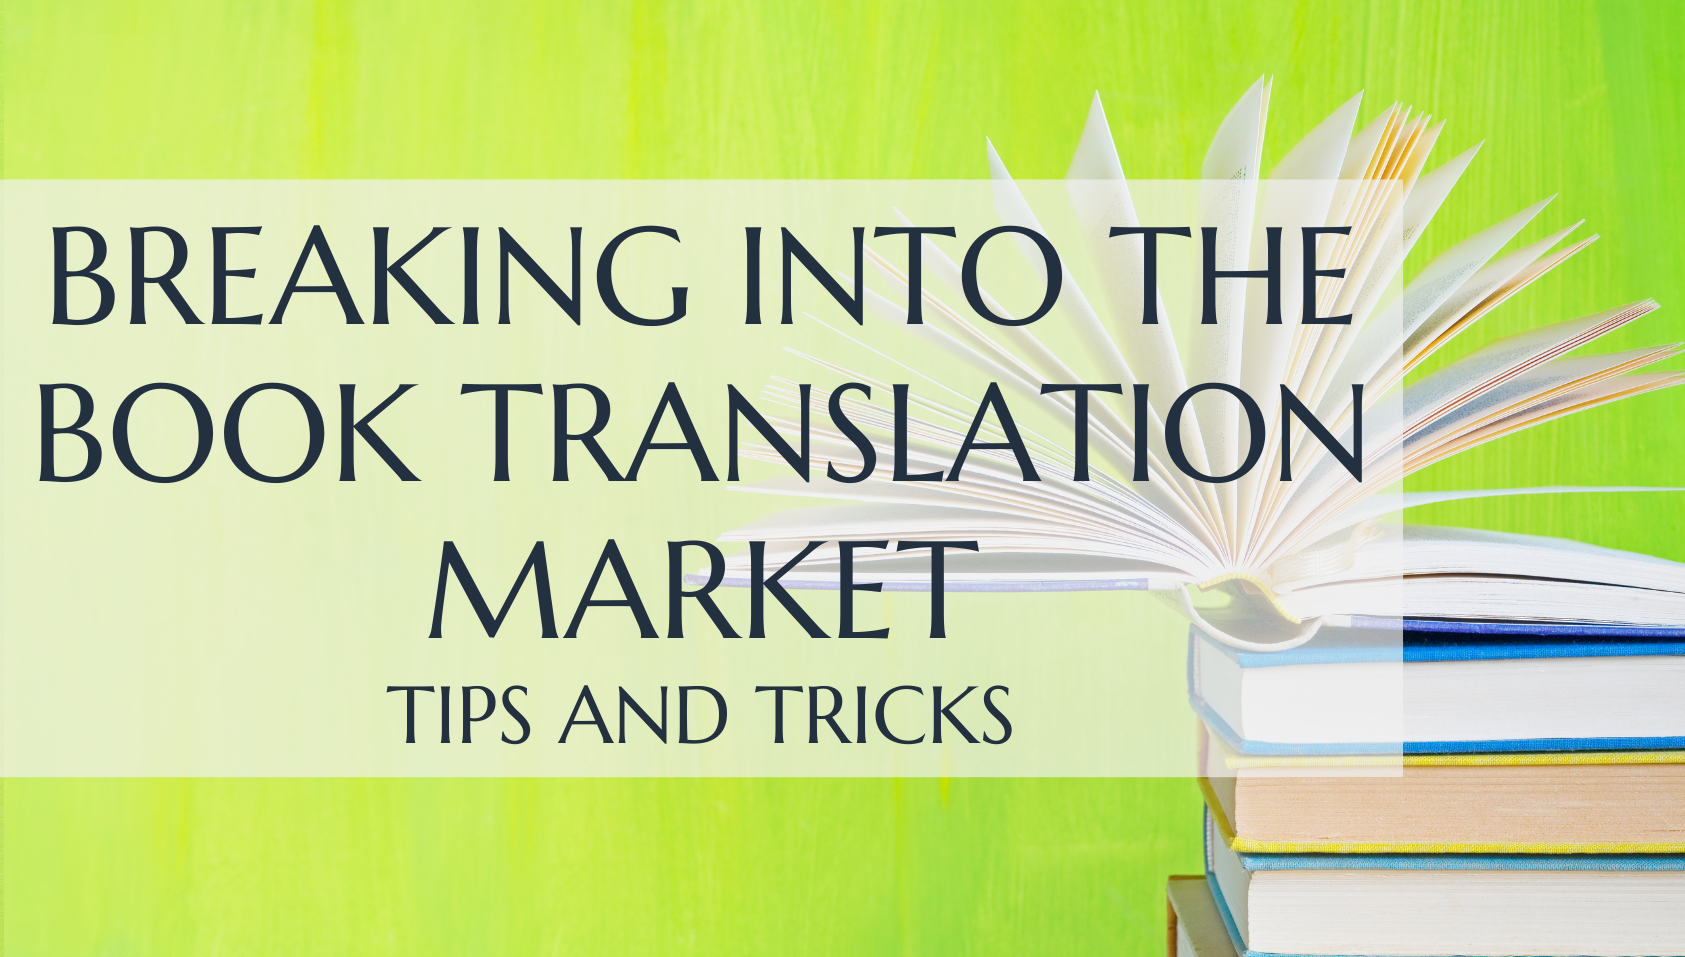 BREAKING INTO THE BOOK TRANSLATION